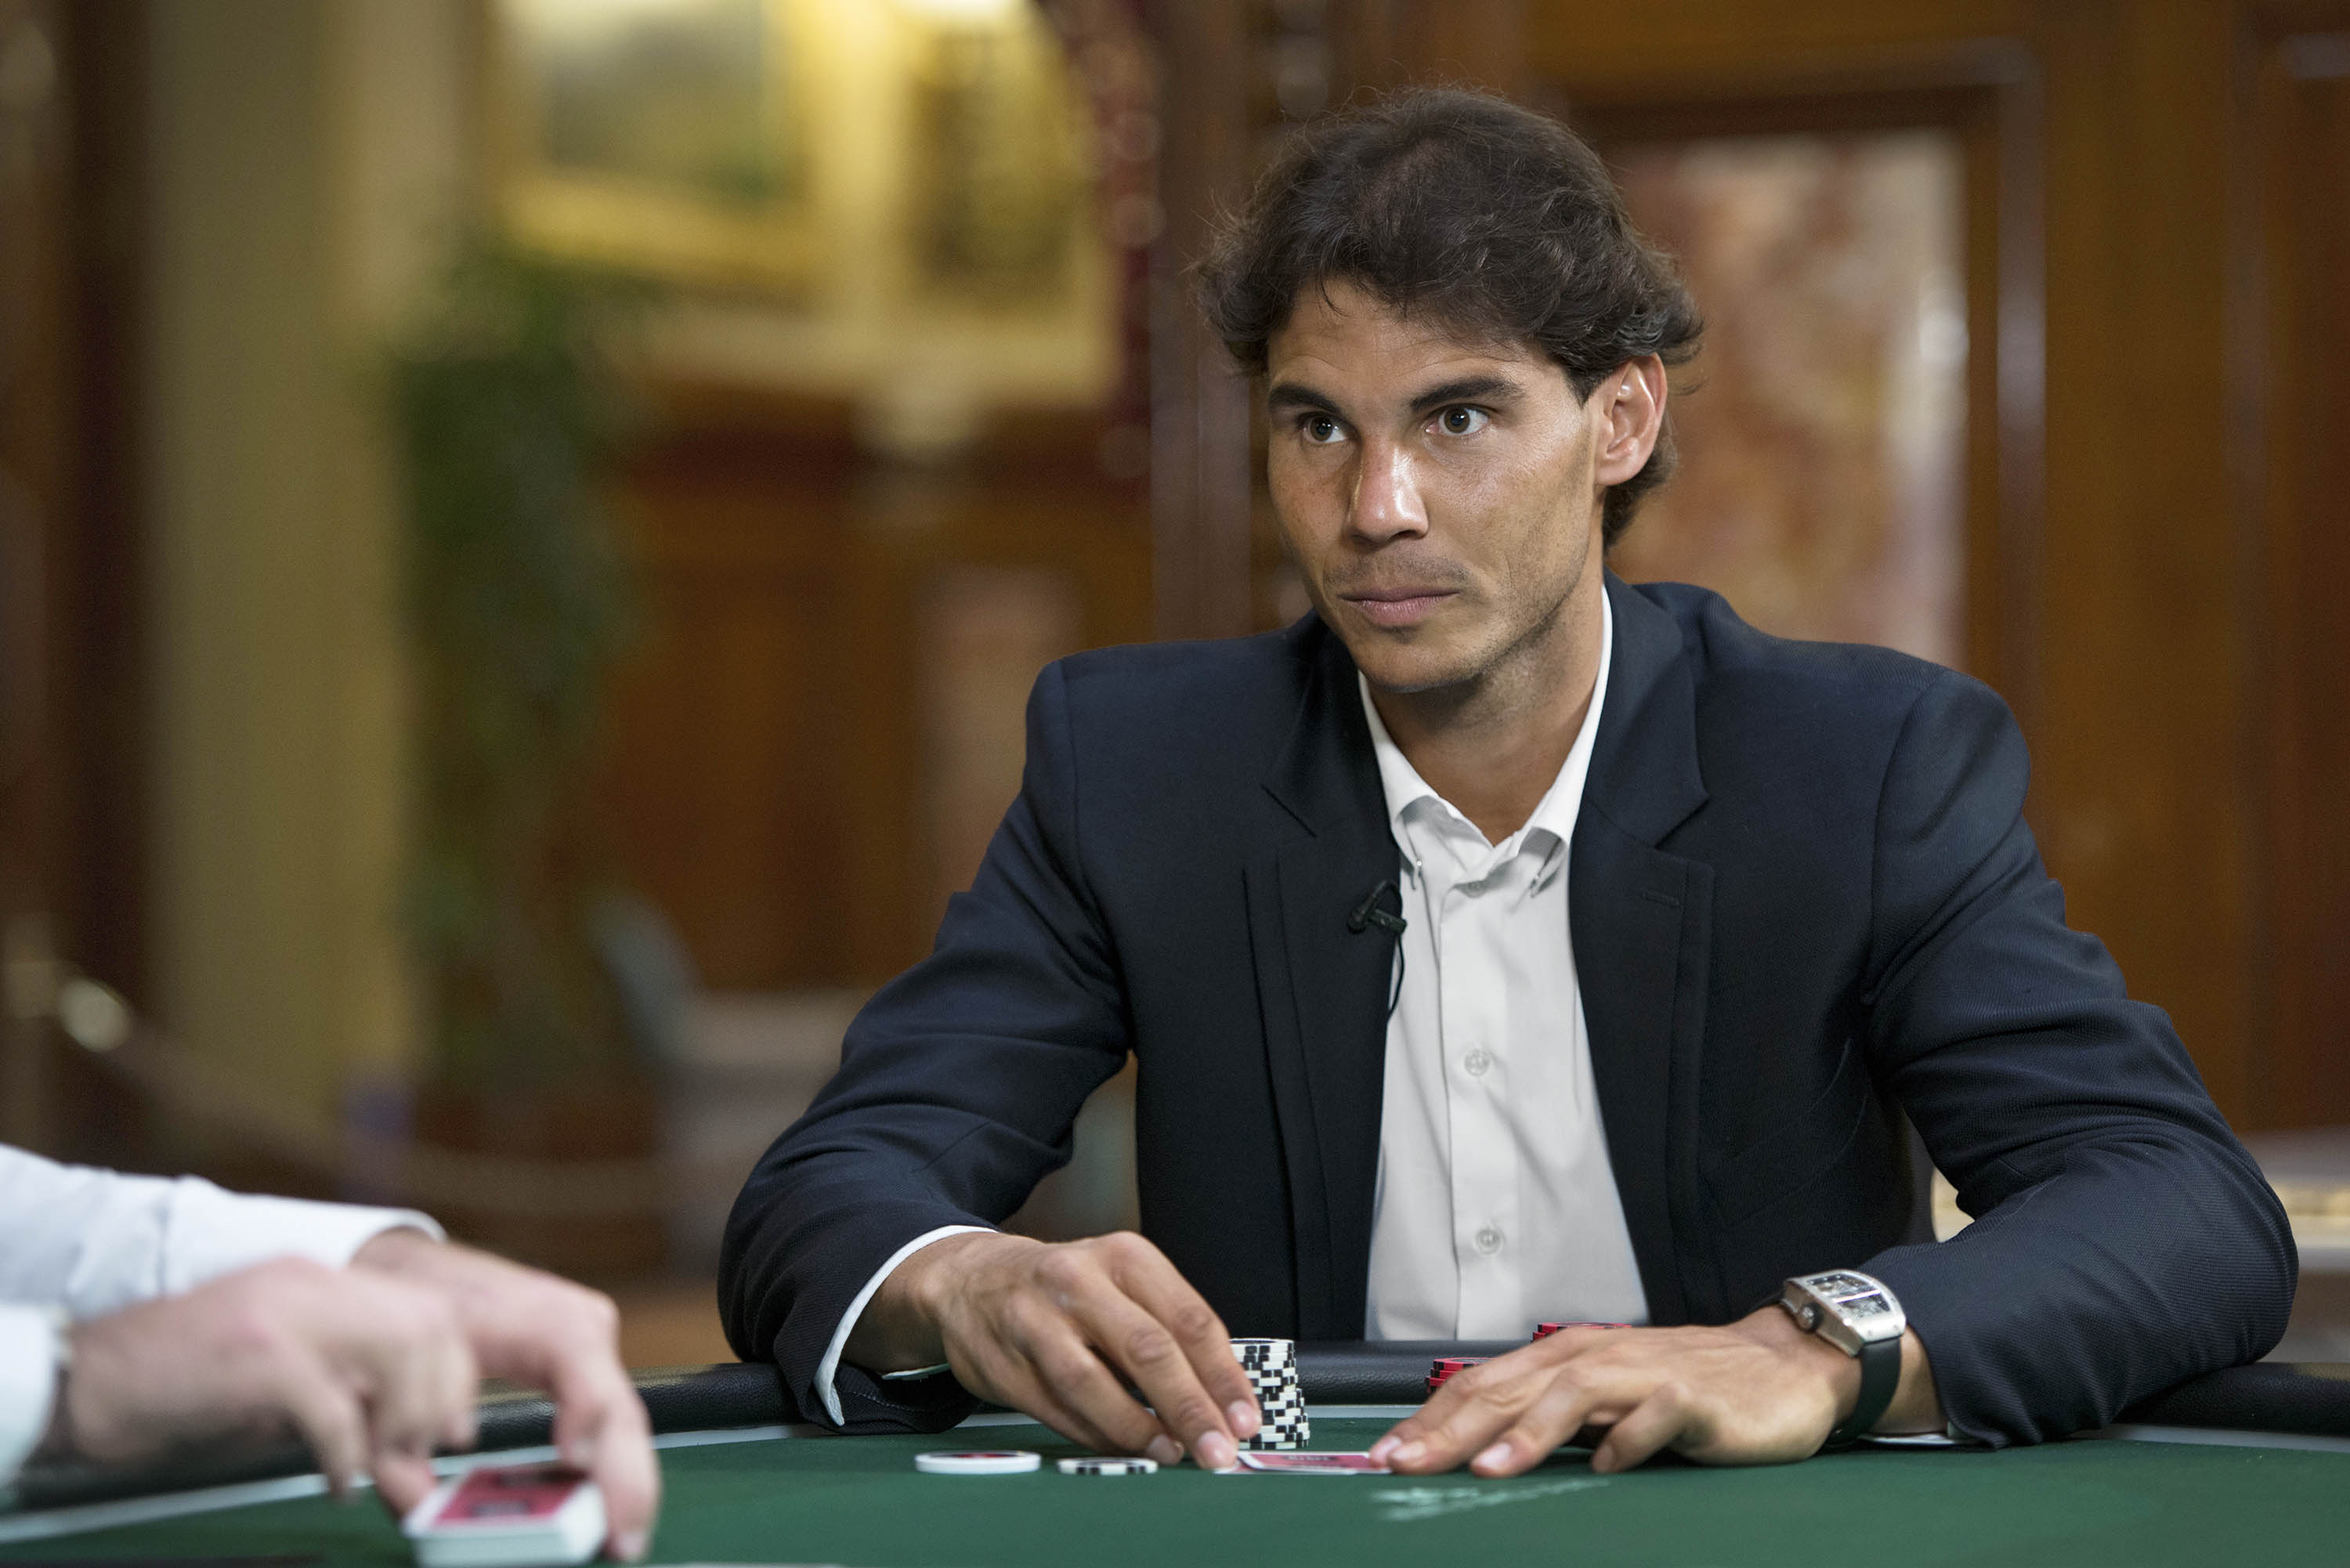 Rafael Nadal, one of the world's top tennis pros, plays poker against one of the world’s best female poker players, Vanessa Selbst, at the Casino de Monte Carlo in Monaco on Fri April 11, 2014. (Joachim Ladefoged—VII for TIME)